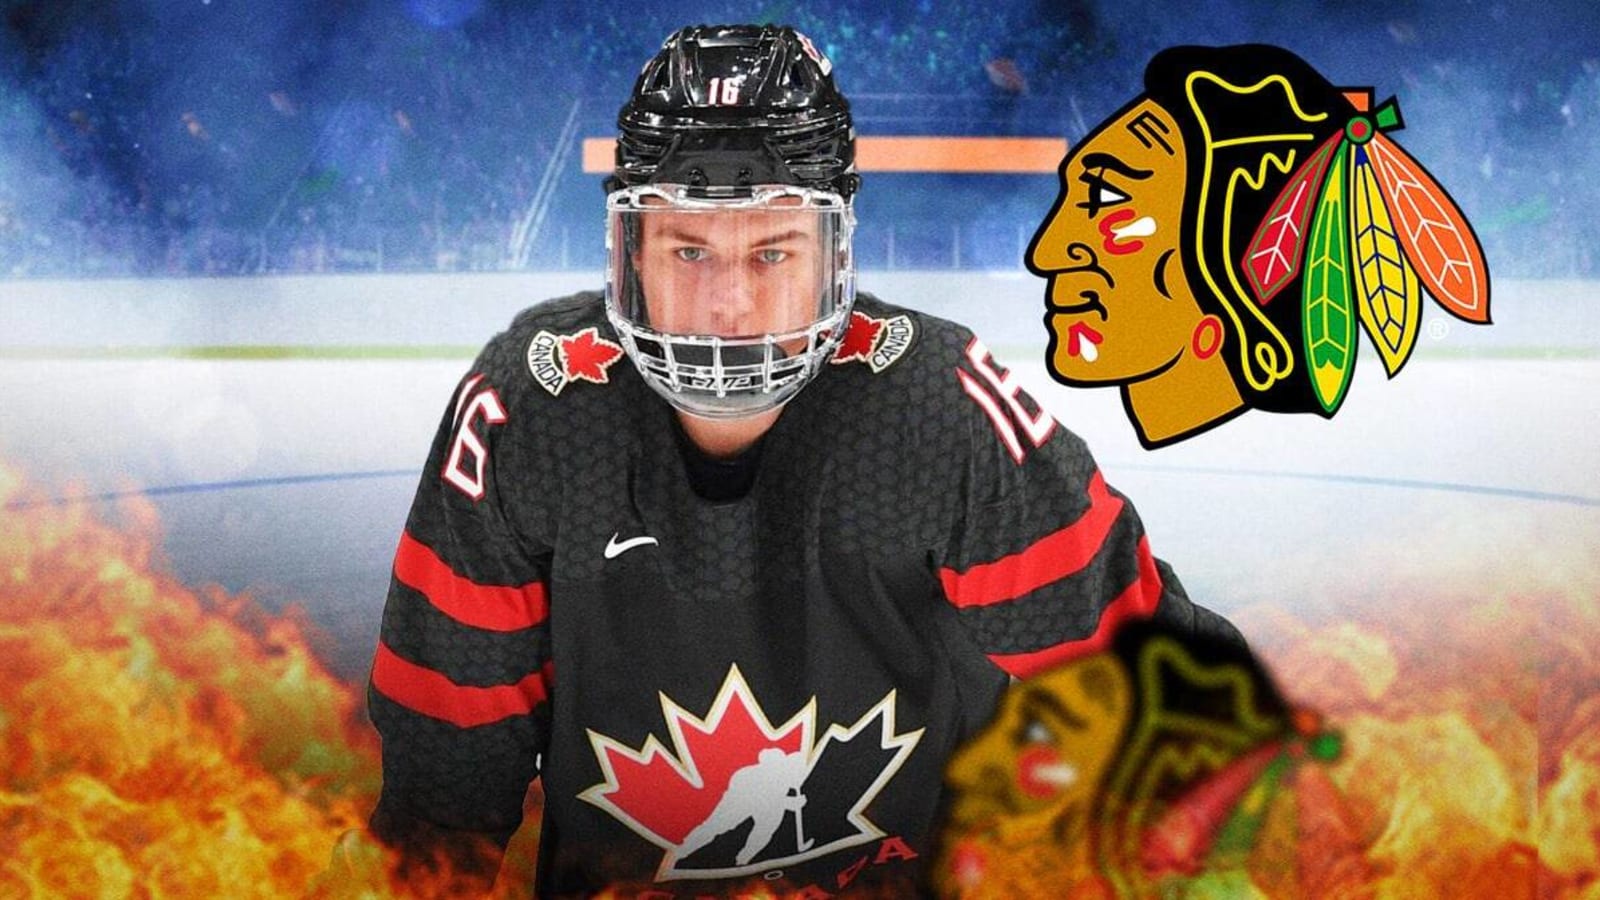 Blackhawks’ Connor Bedard puts on a show in 1st ever World Championship game